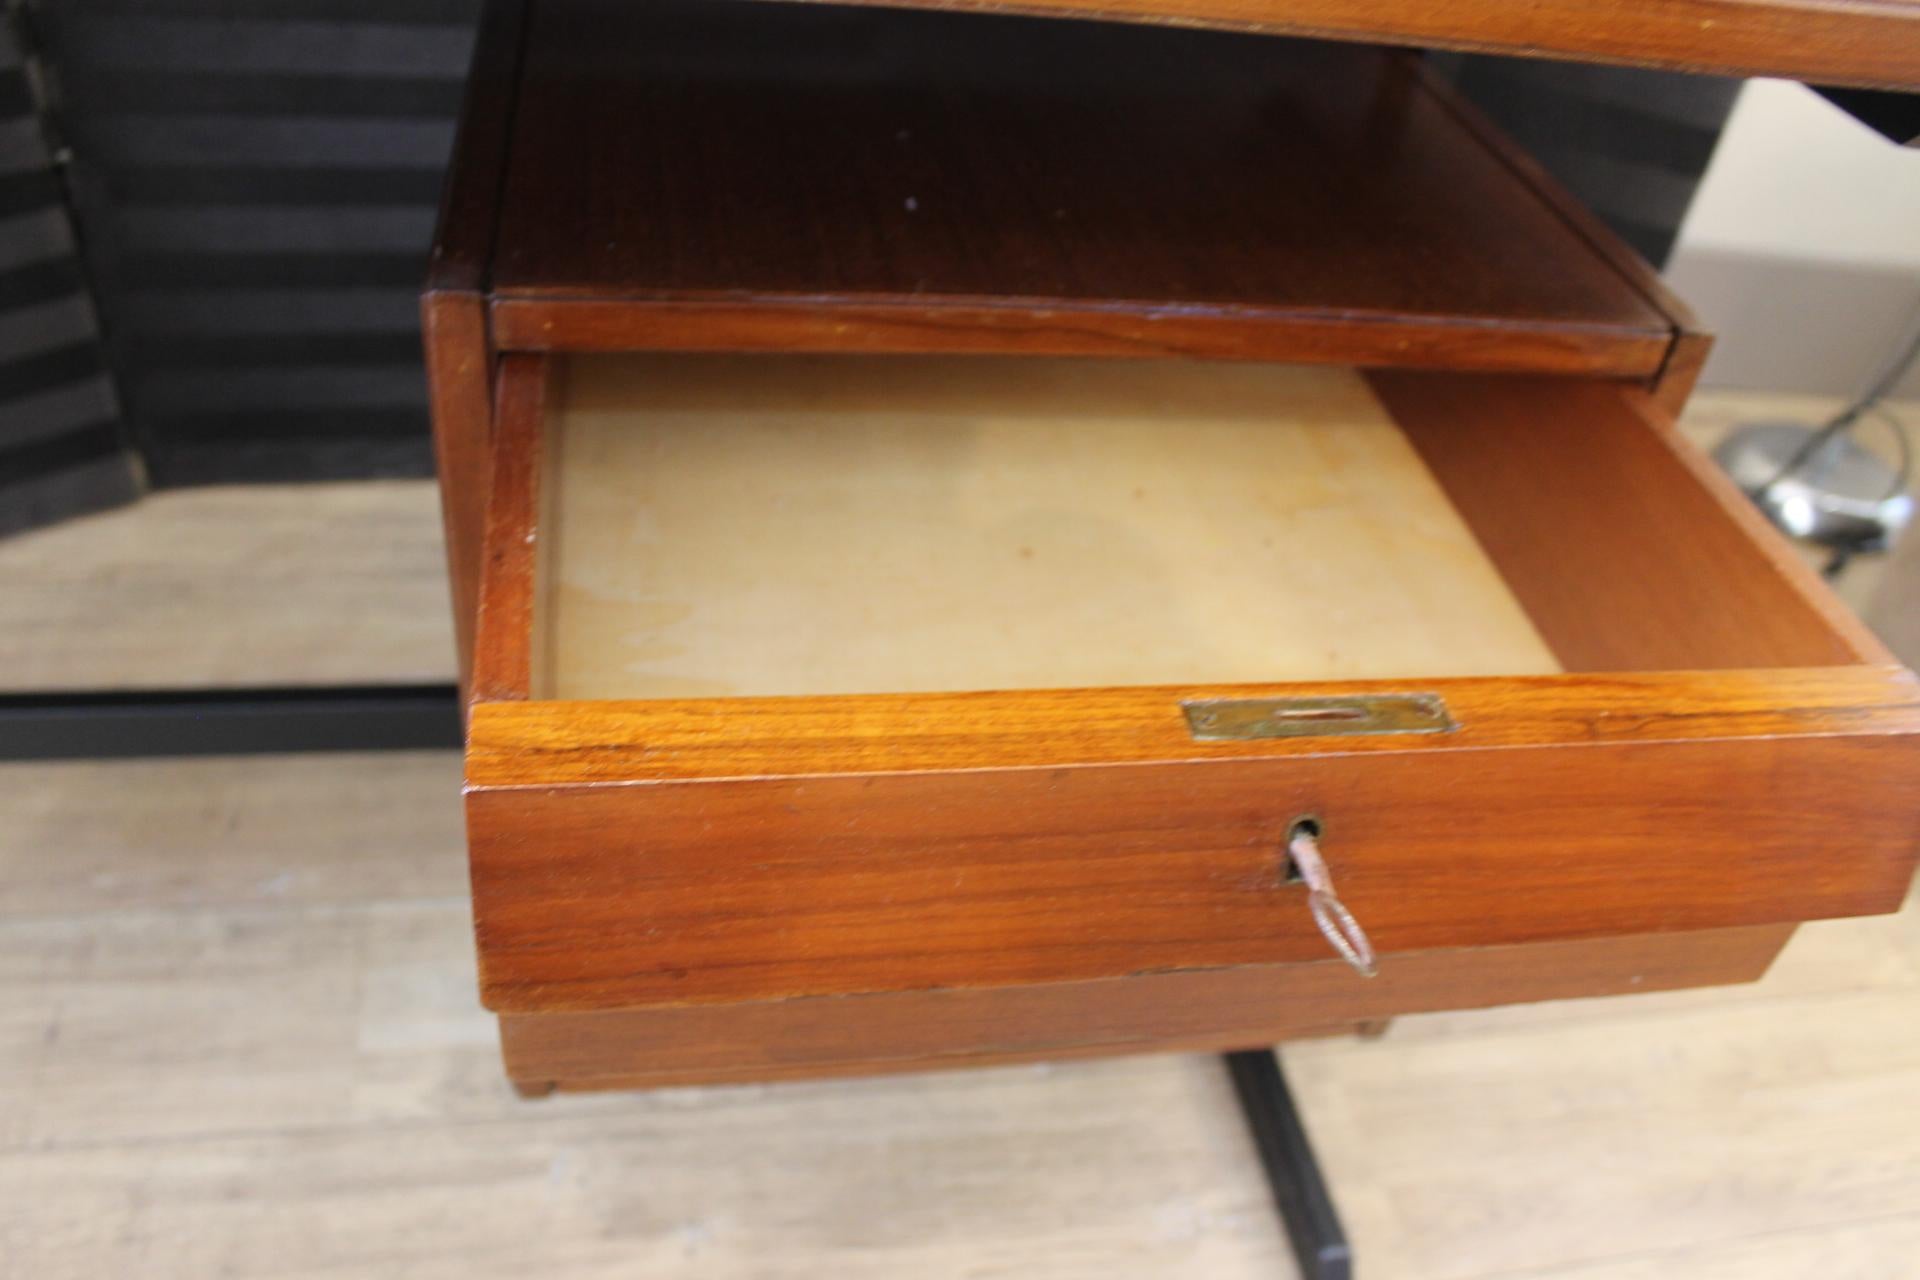 Beech desk, Italian design from the 60s/70s.
Structure in black metal, front with three drawers.
He can stand in the middle of a room.
This desk has been restored (buffer varnish).